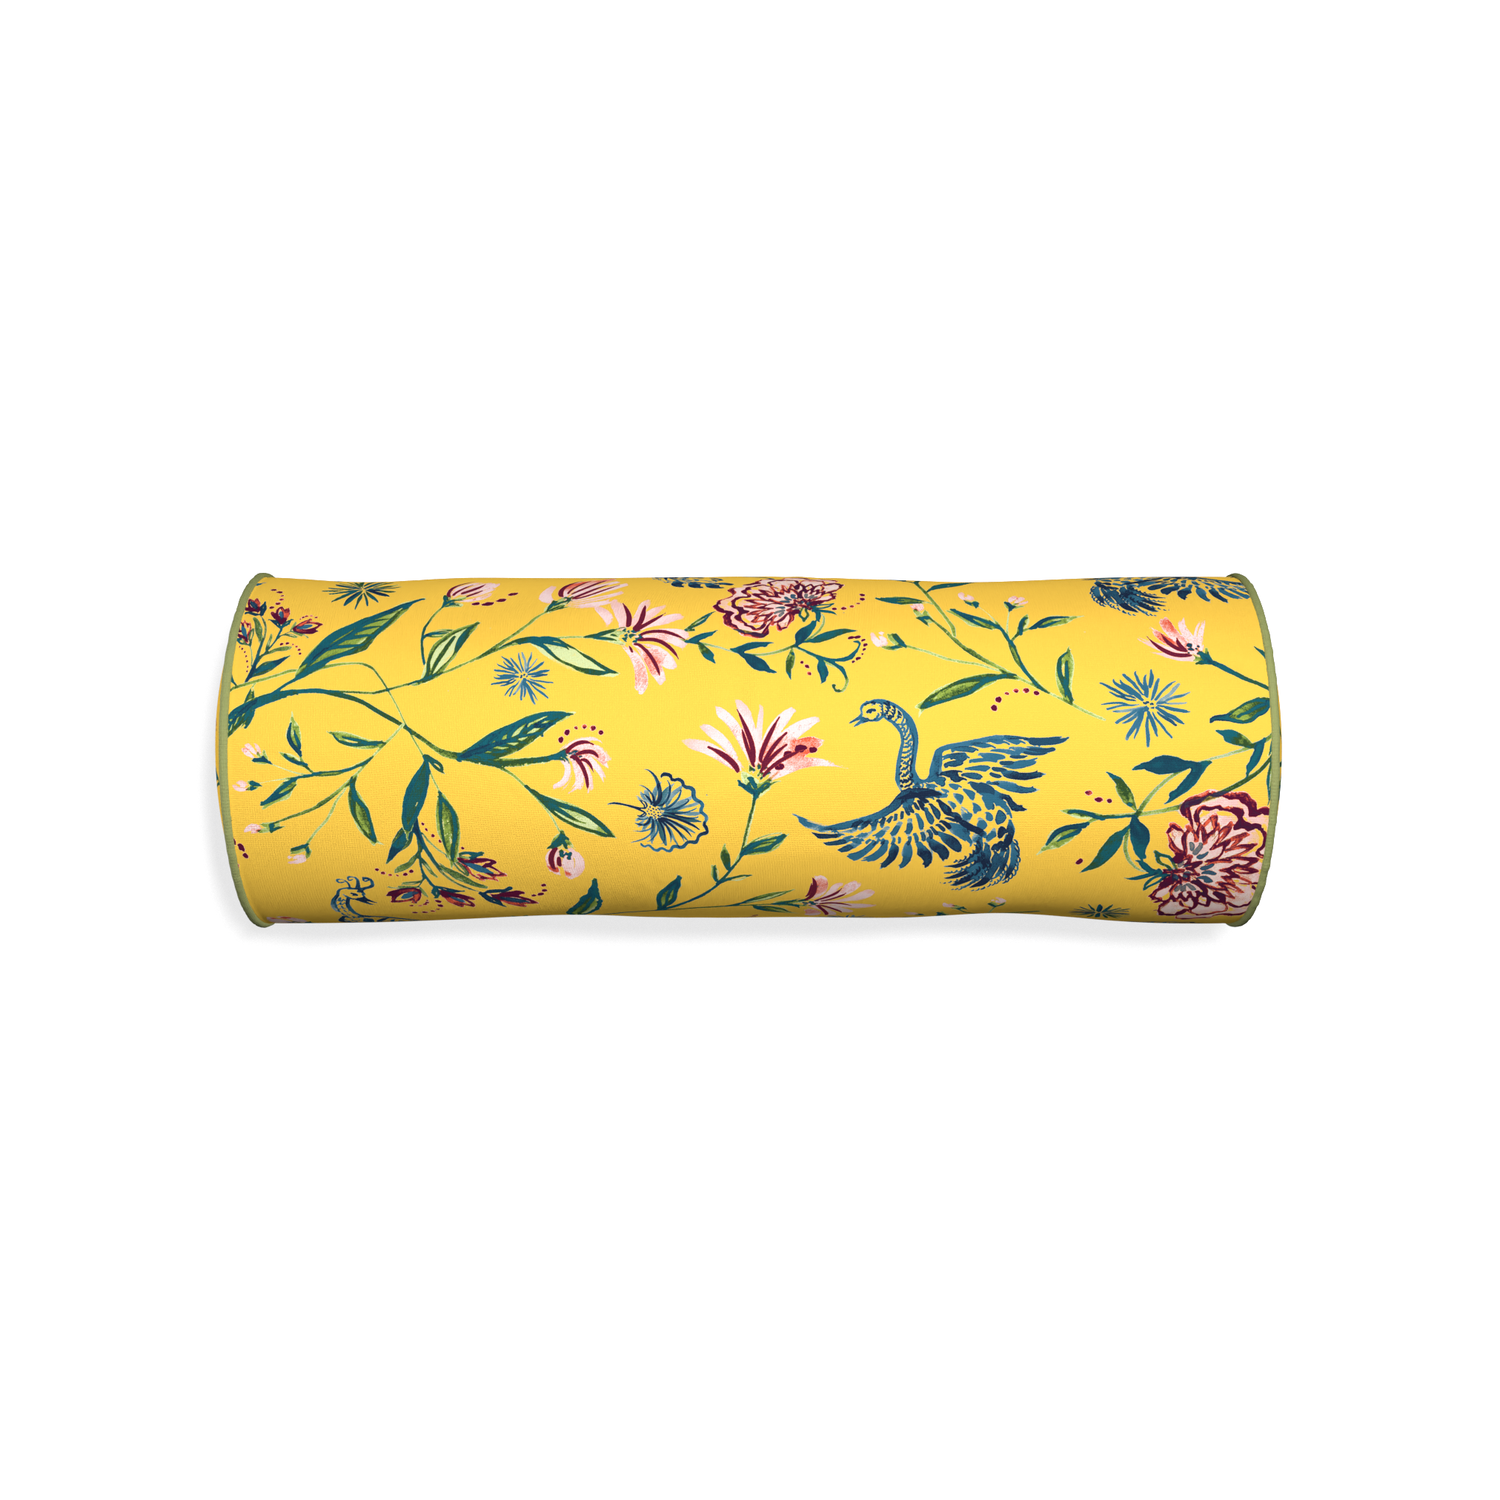 Bolster daphne canary custom pillow with moss piping on white background